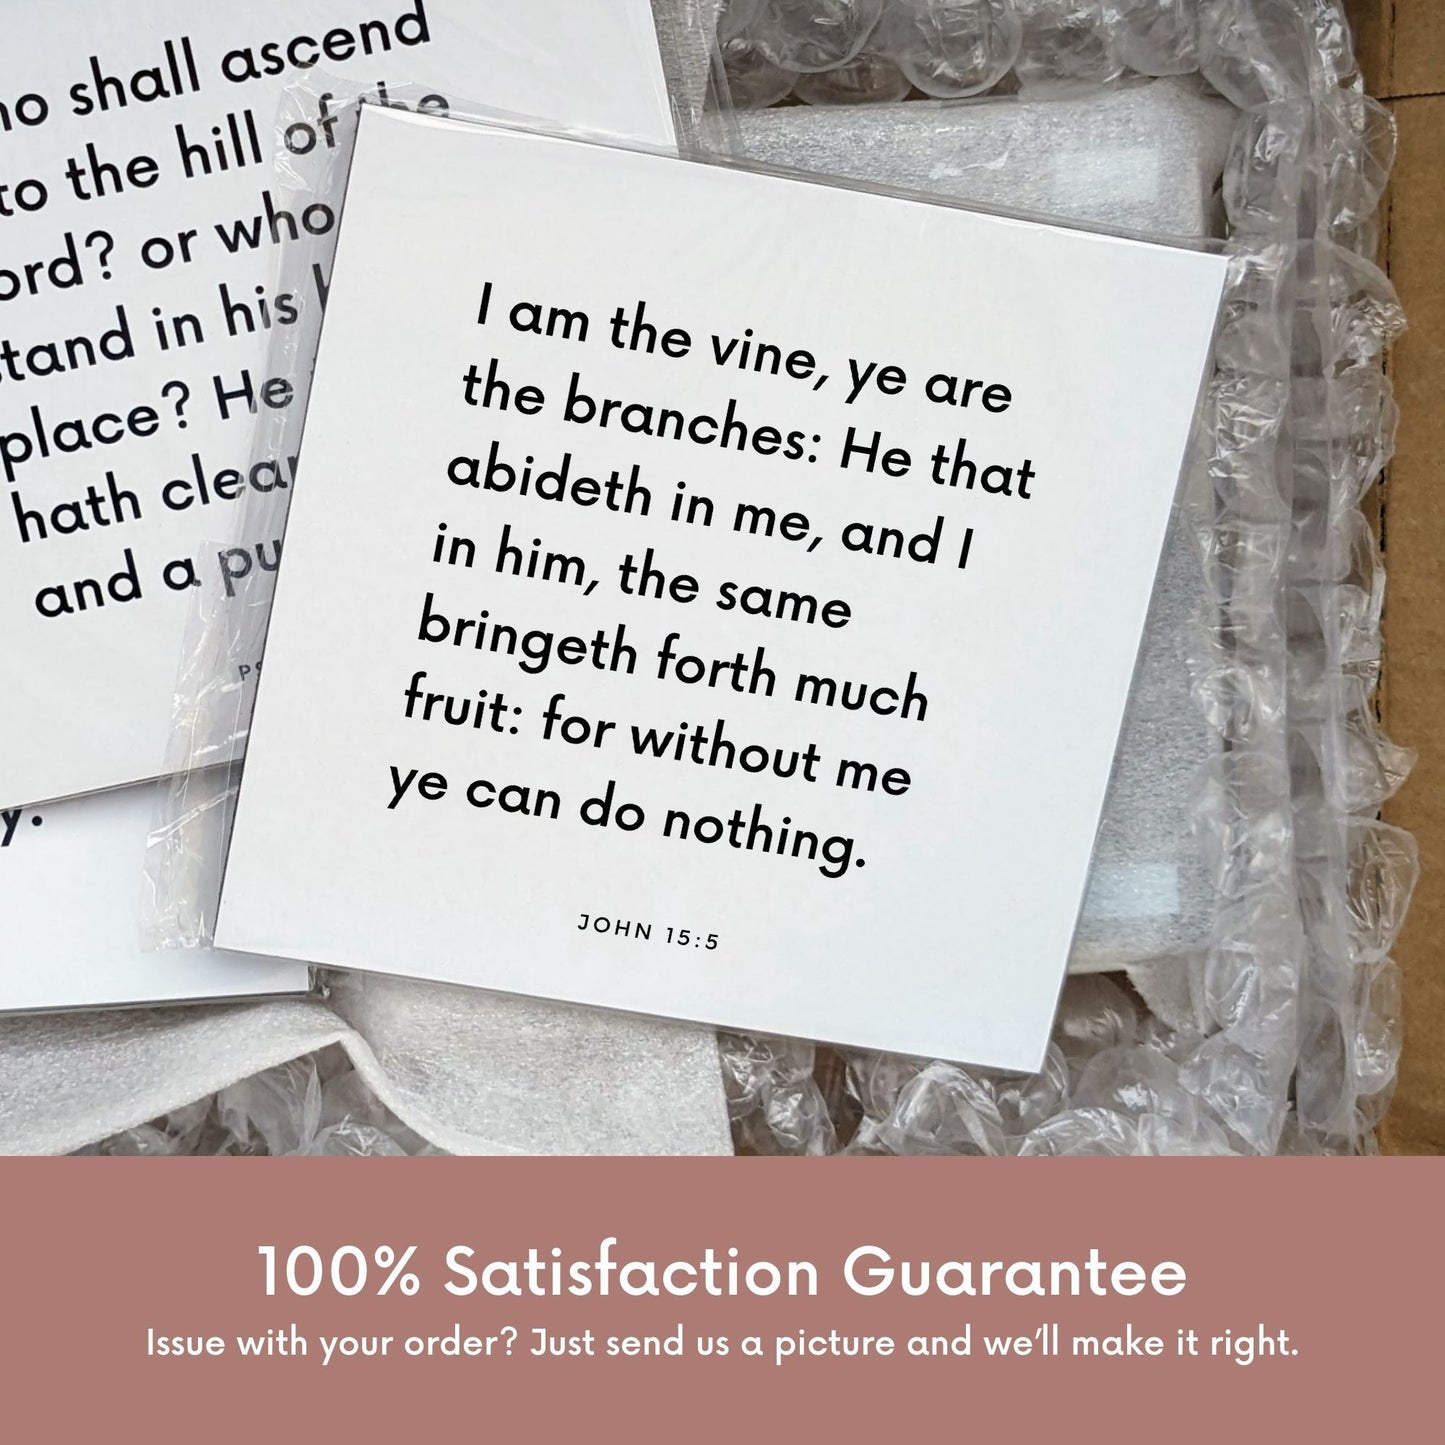 Shipping materials for scripture tile of John 15:5 - "I am the vine, ye are the branches"